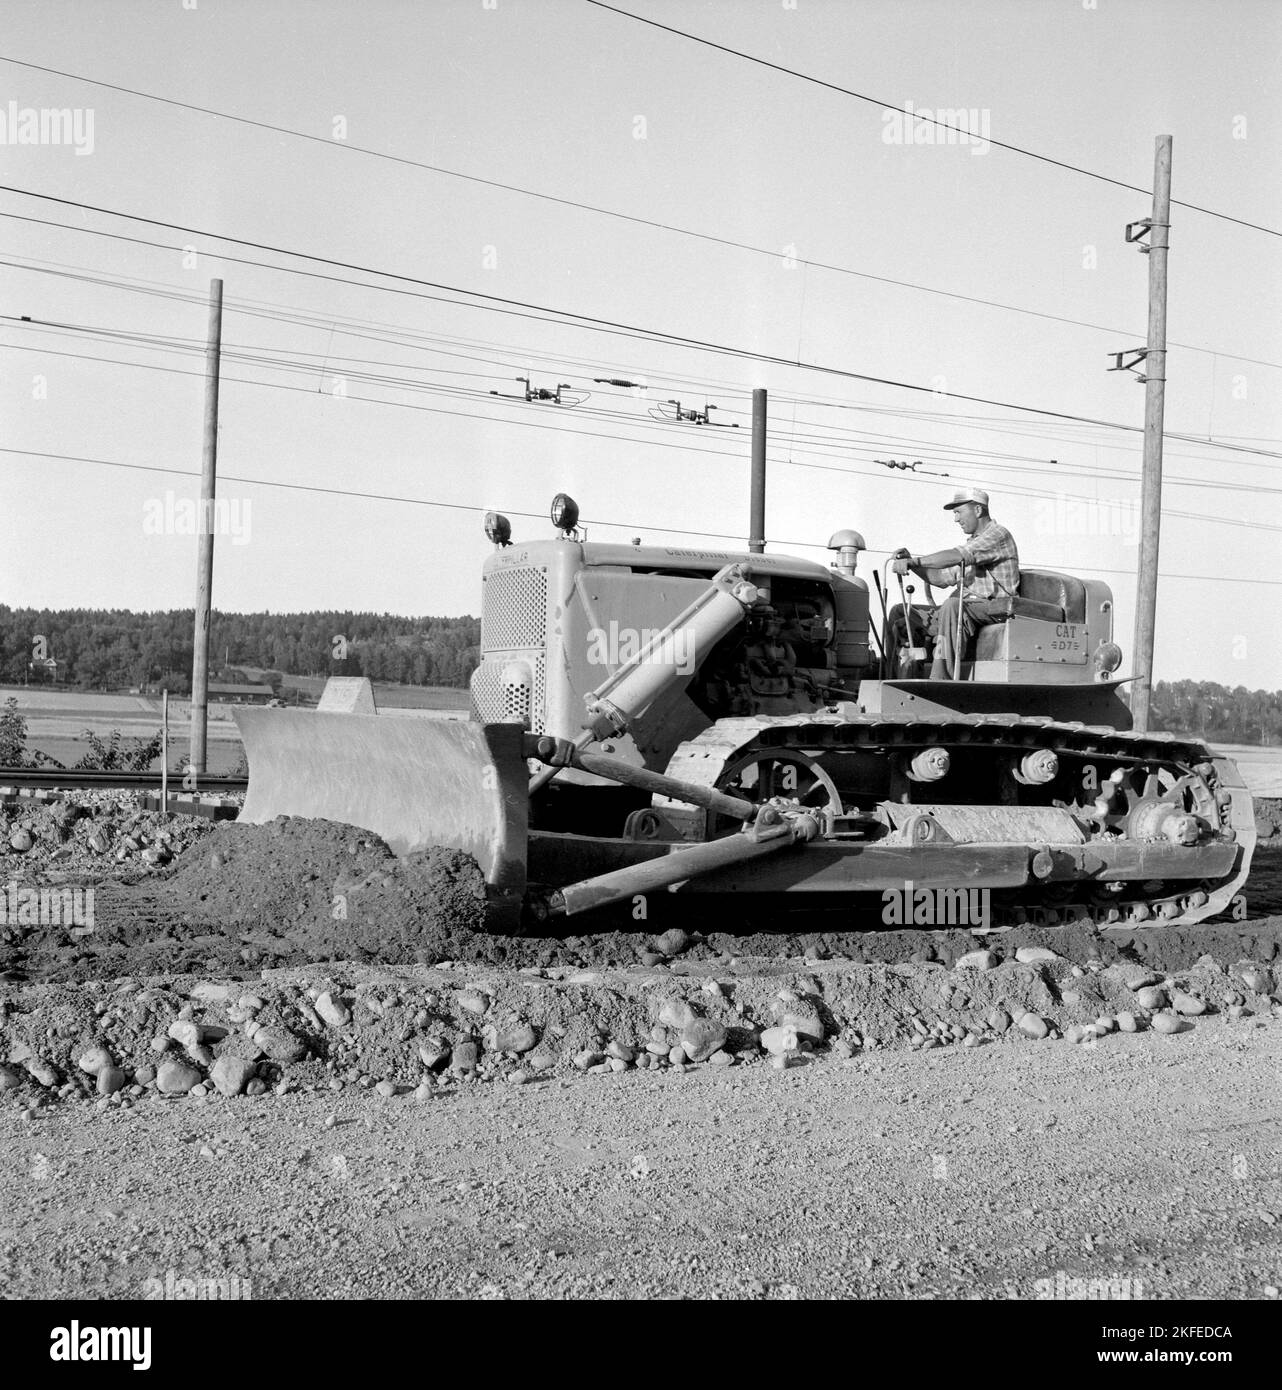 In the 1950s. The heavy machinery, a bulldozer looks gigantic when comparing to hte man sitting in the drivers seat with cabin or protection around him. It's a 20 tons Caterpillar Diesel model  D7, 240 hp engine. Cat is short for Caterpillar. Picture is taken on a railway construction site when the bulldozer flattens and spreads the material used to laying railway tracks on. Sweden august 1955 Stock Photo